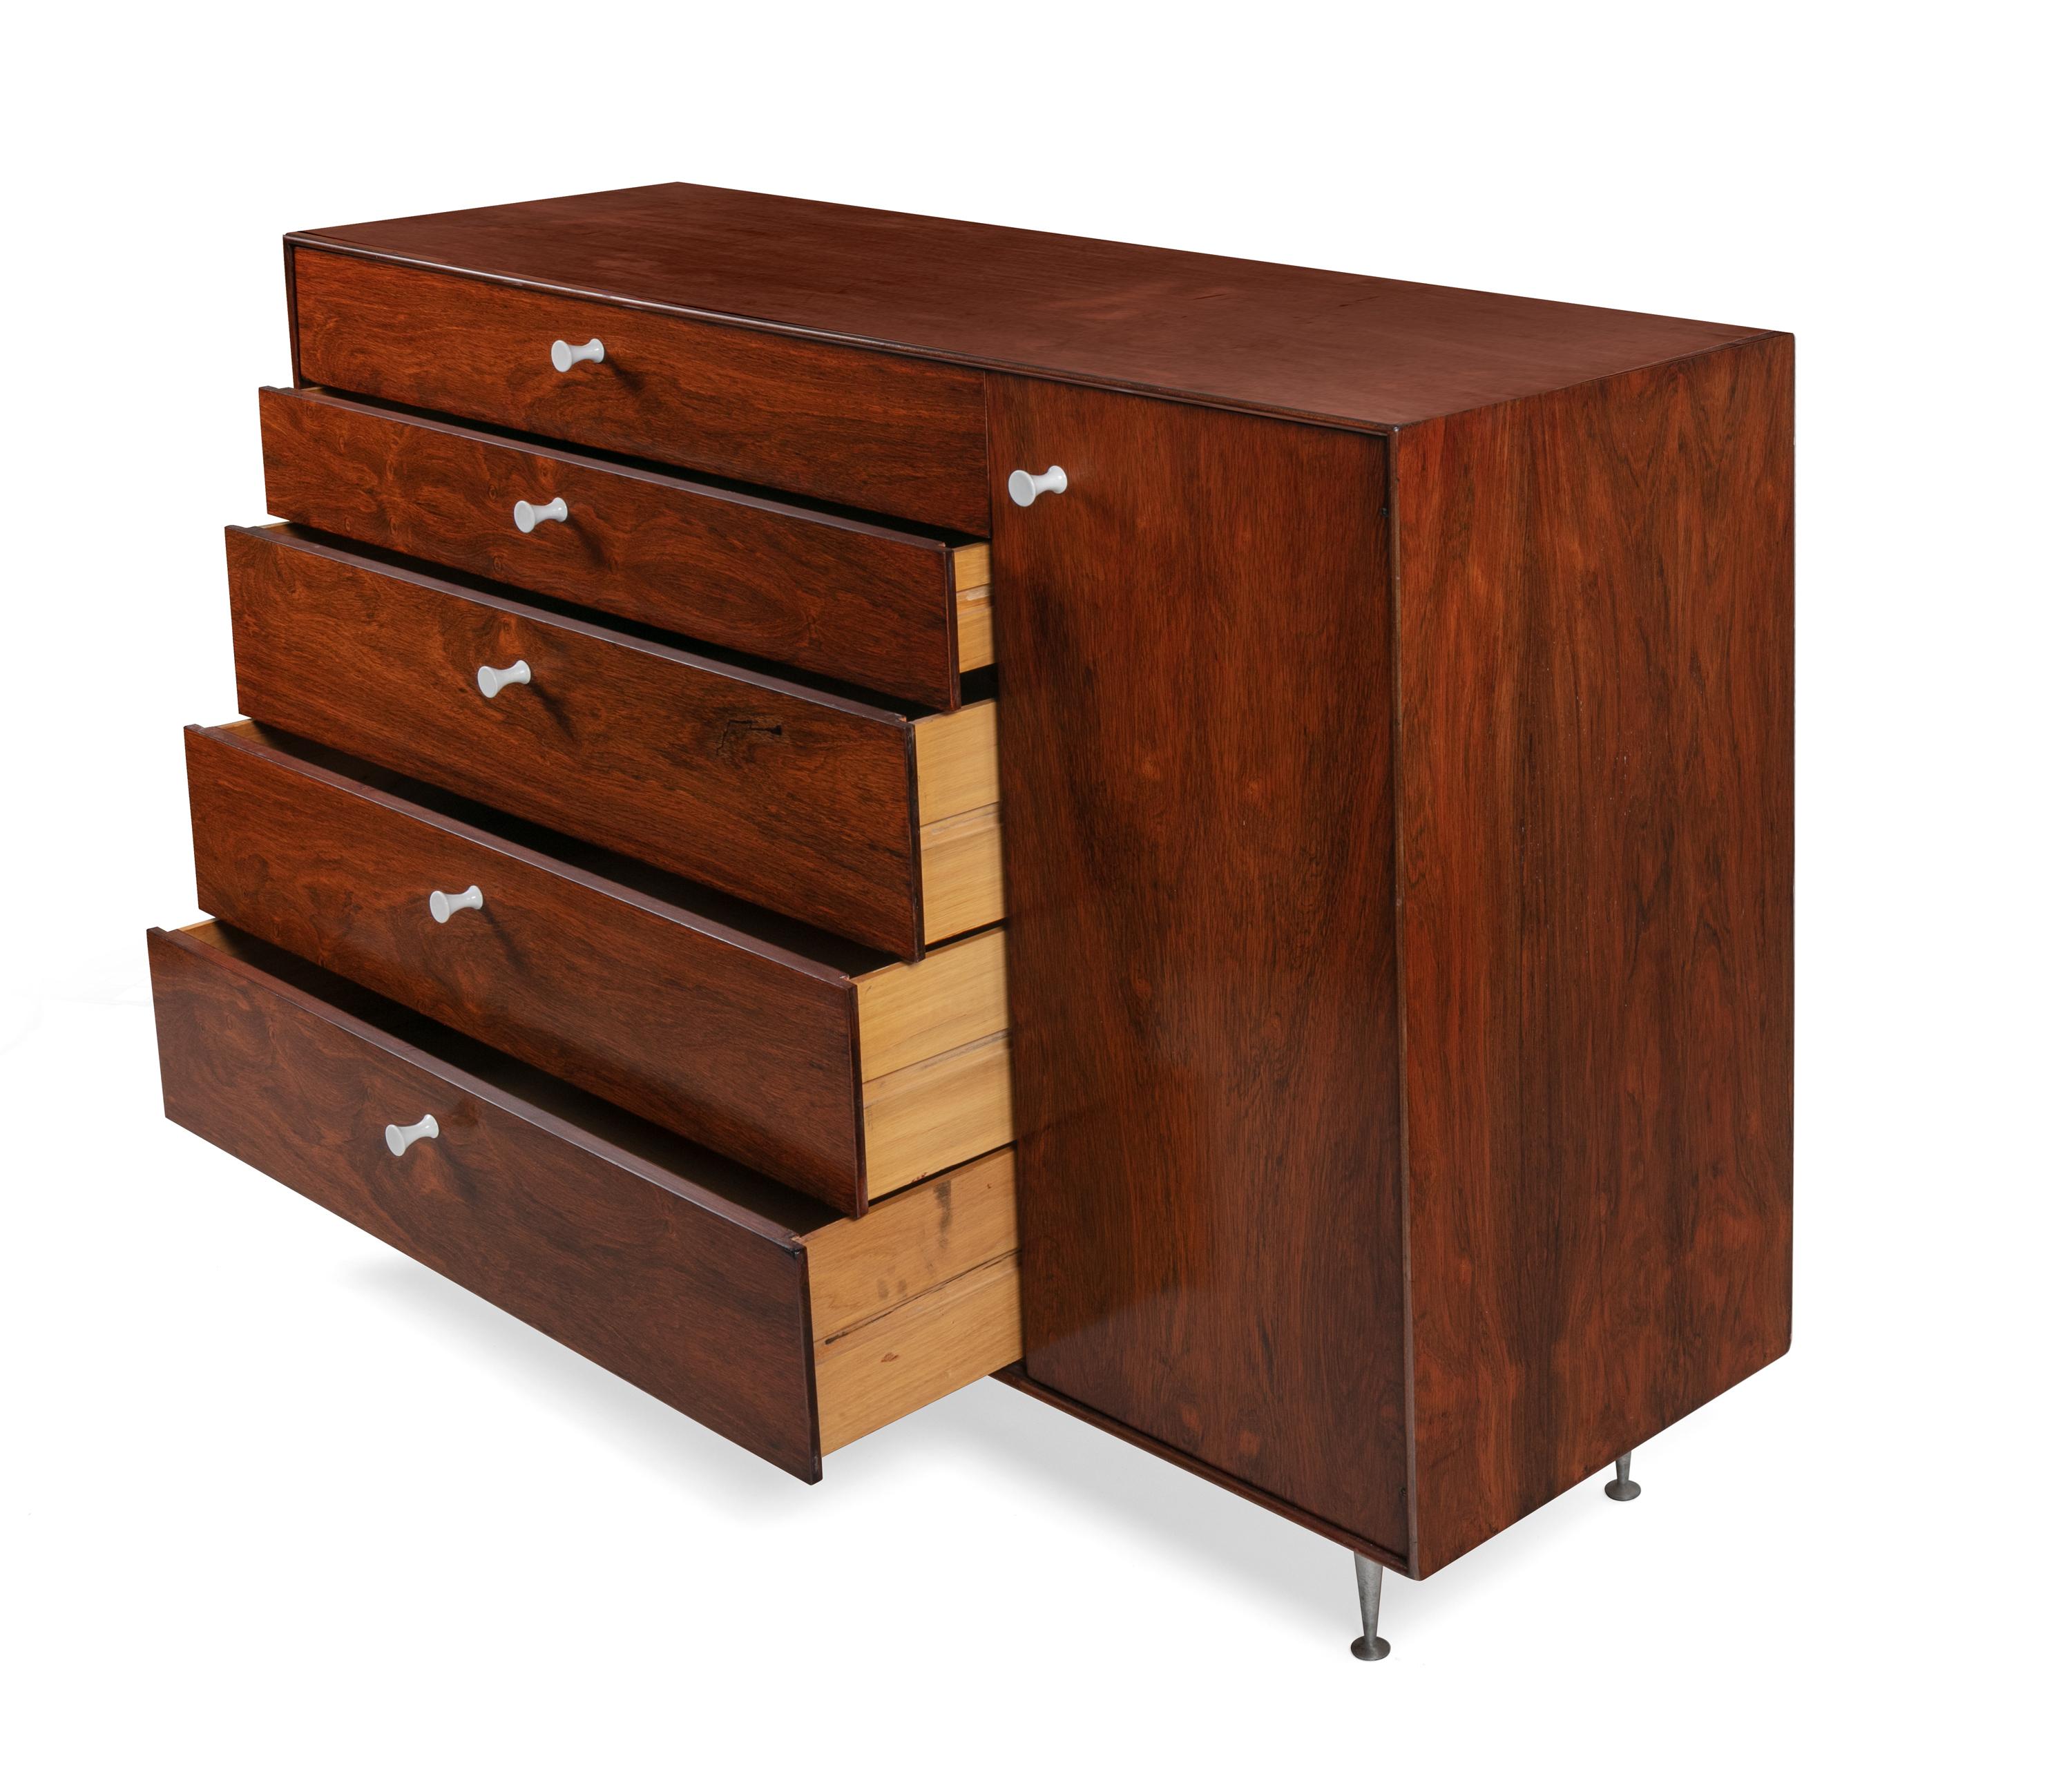 American George Nelson Rosewood Thin Edge Chest of Drawers/Cabinet, Herman Miller, 1950s